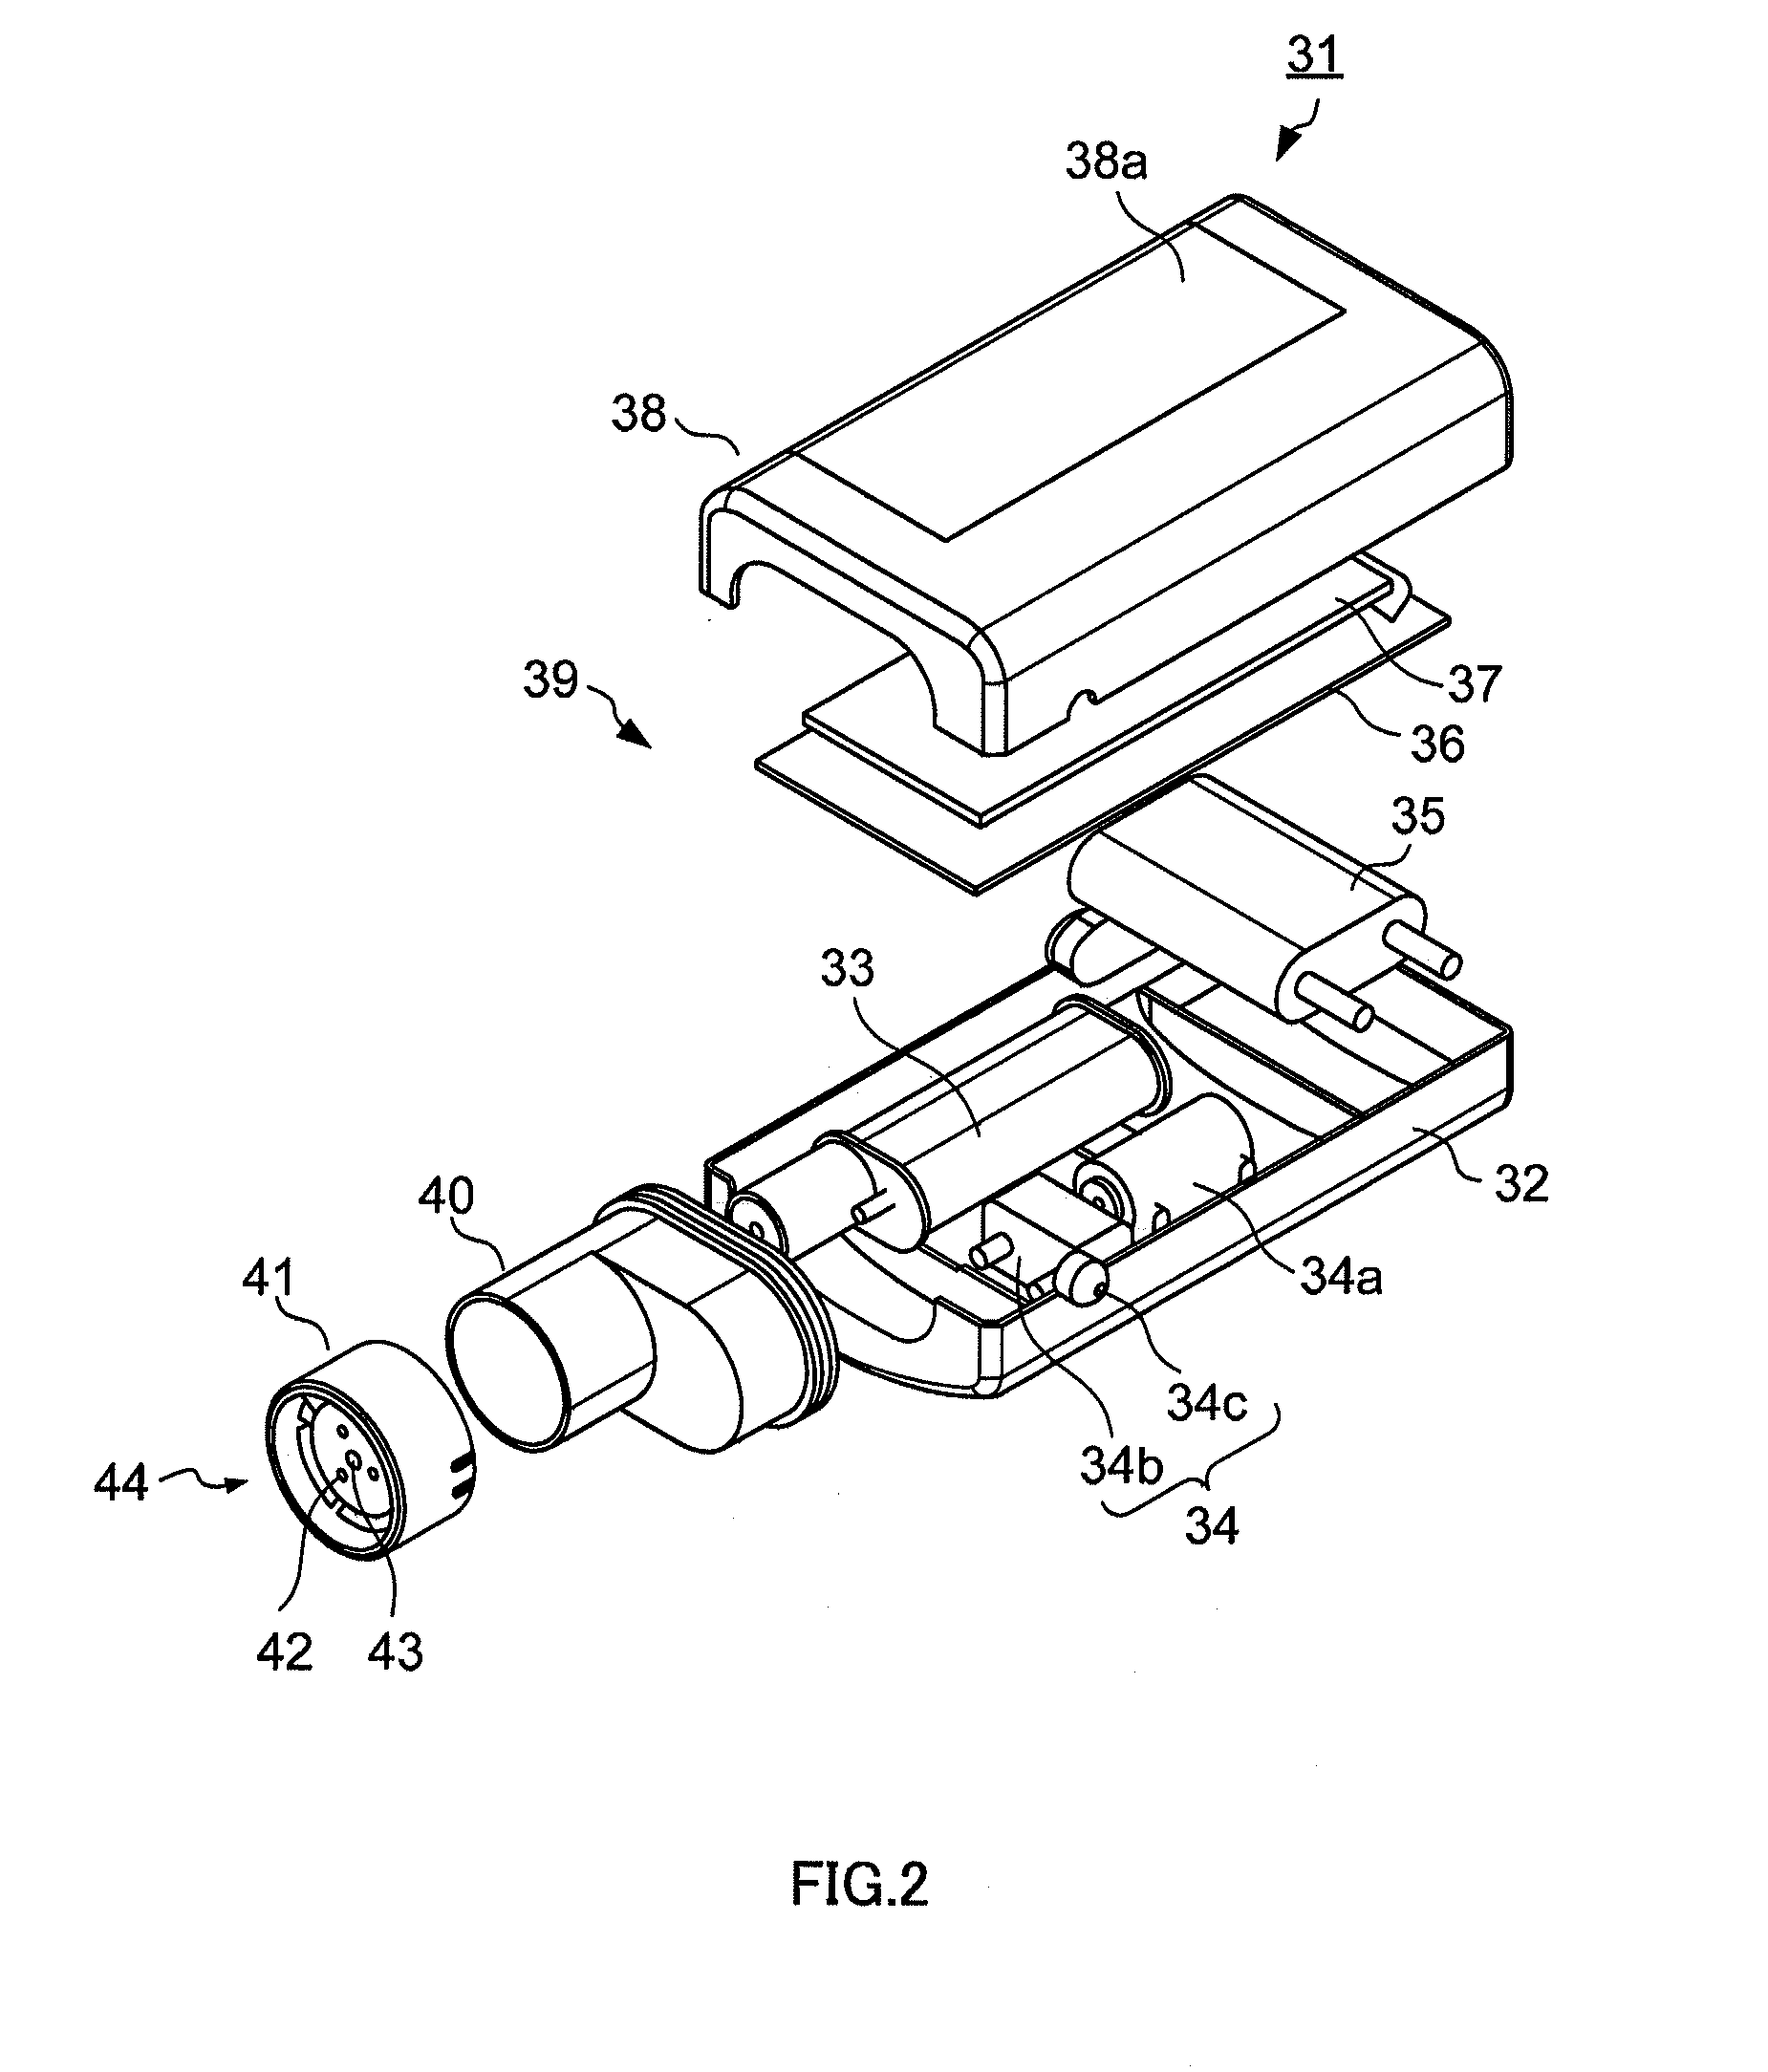 Blood inspection device